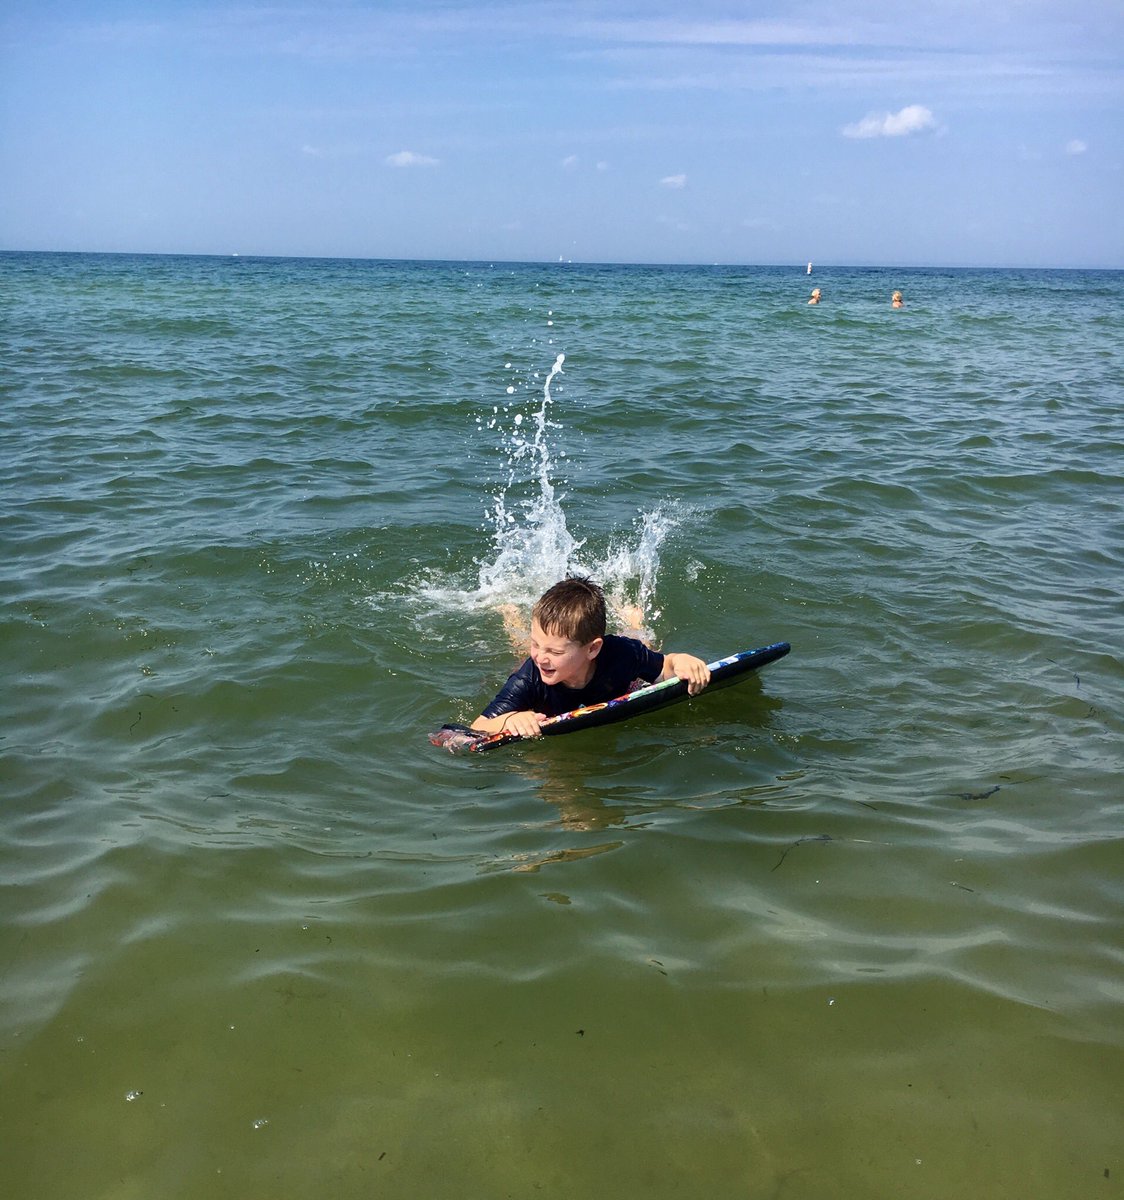 Riding the waves. 🌊 #capecod #oceanadventures #boogieboarding #kidapproved